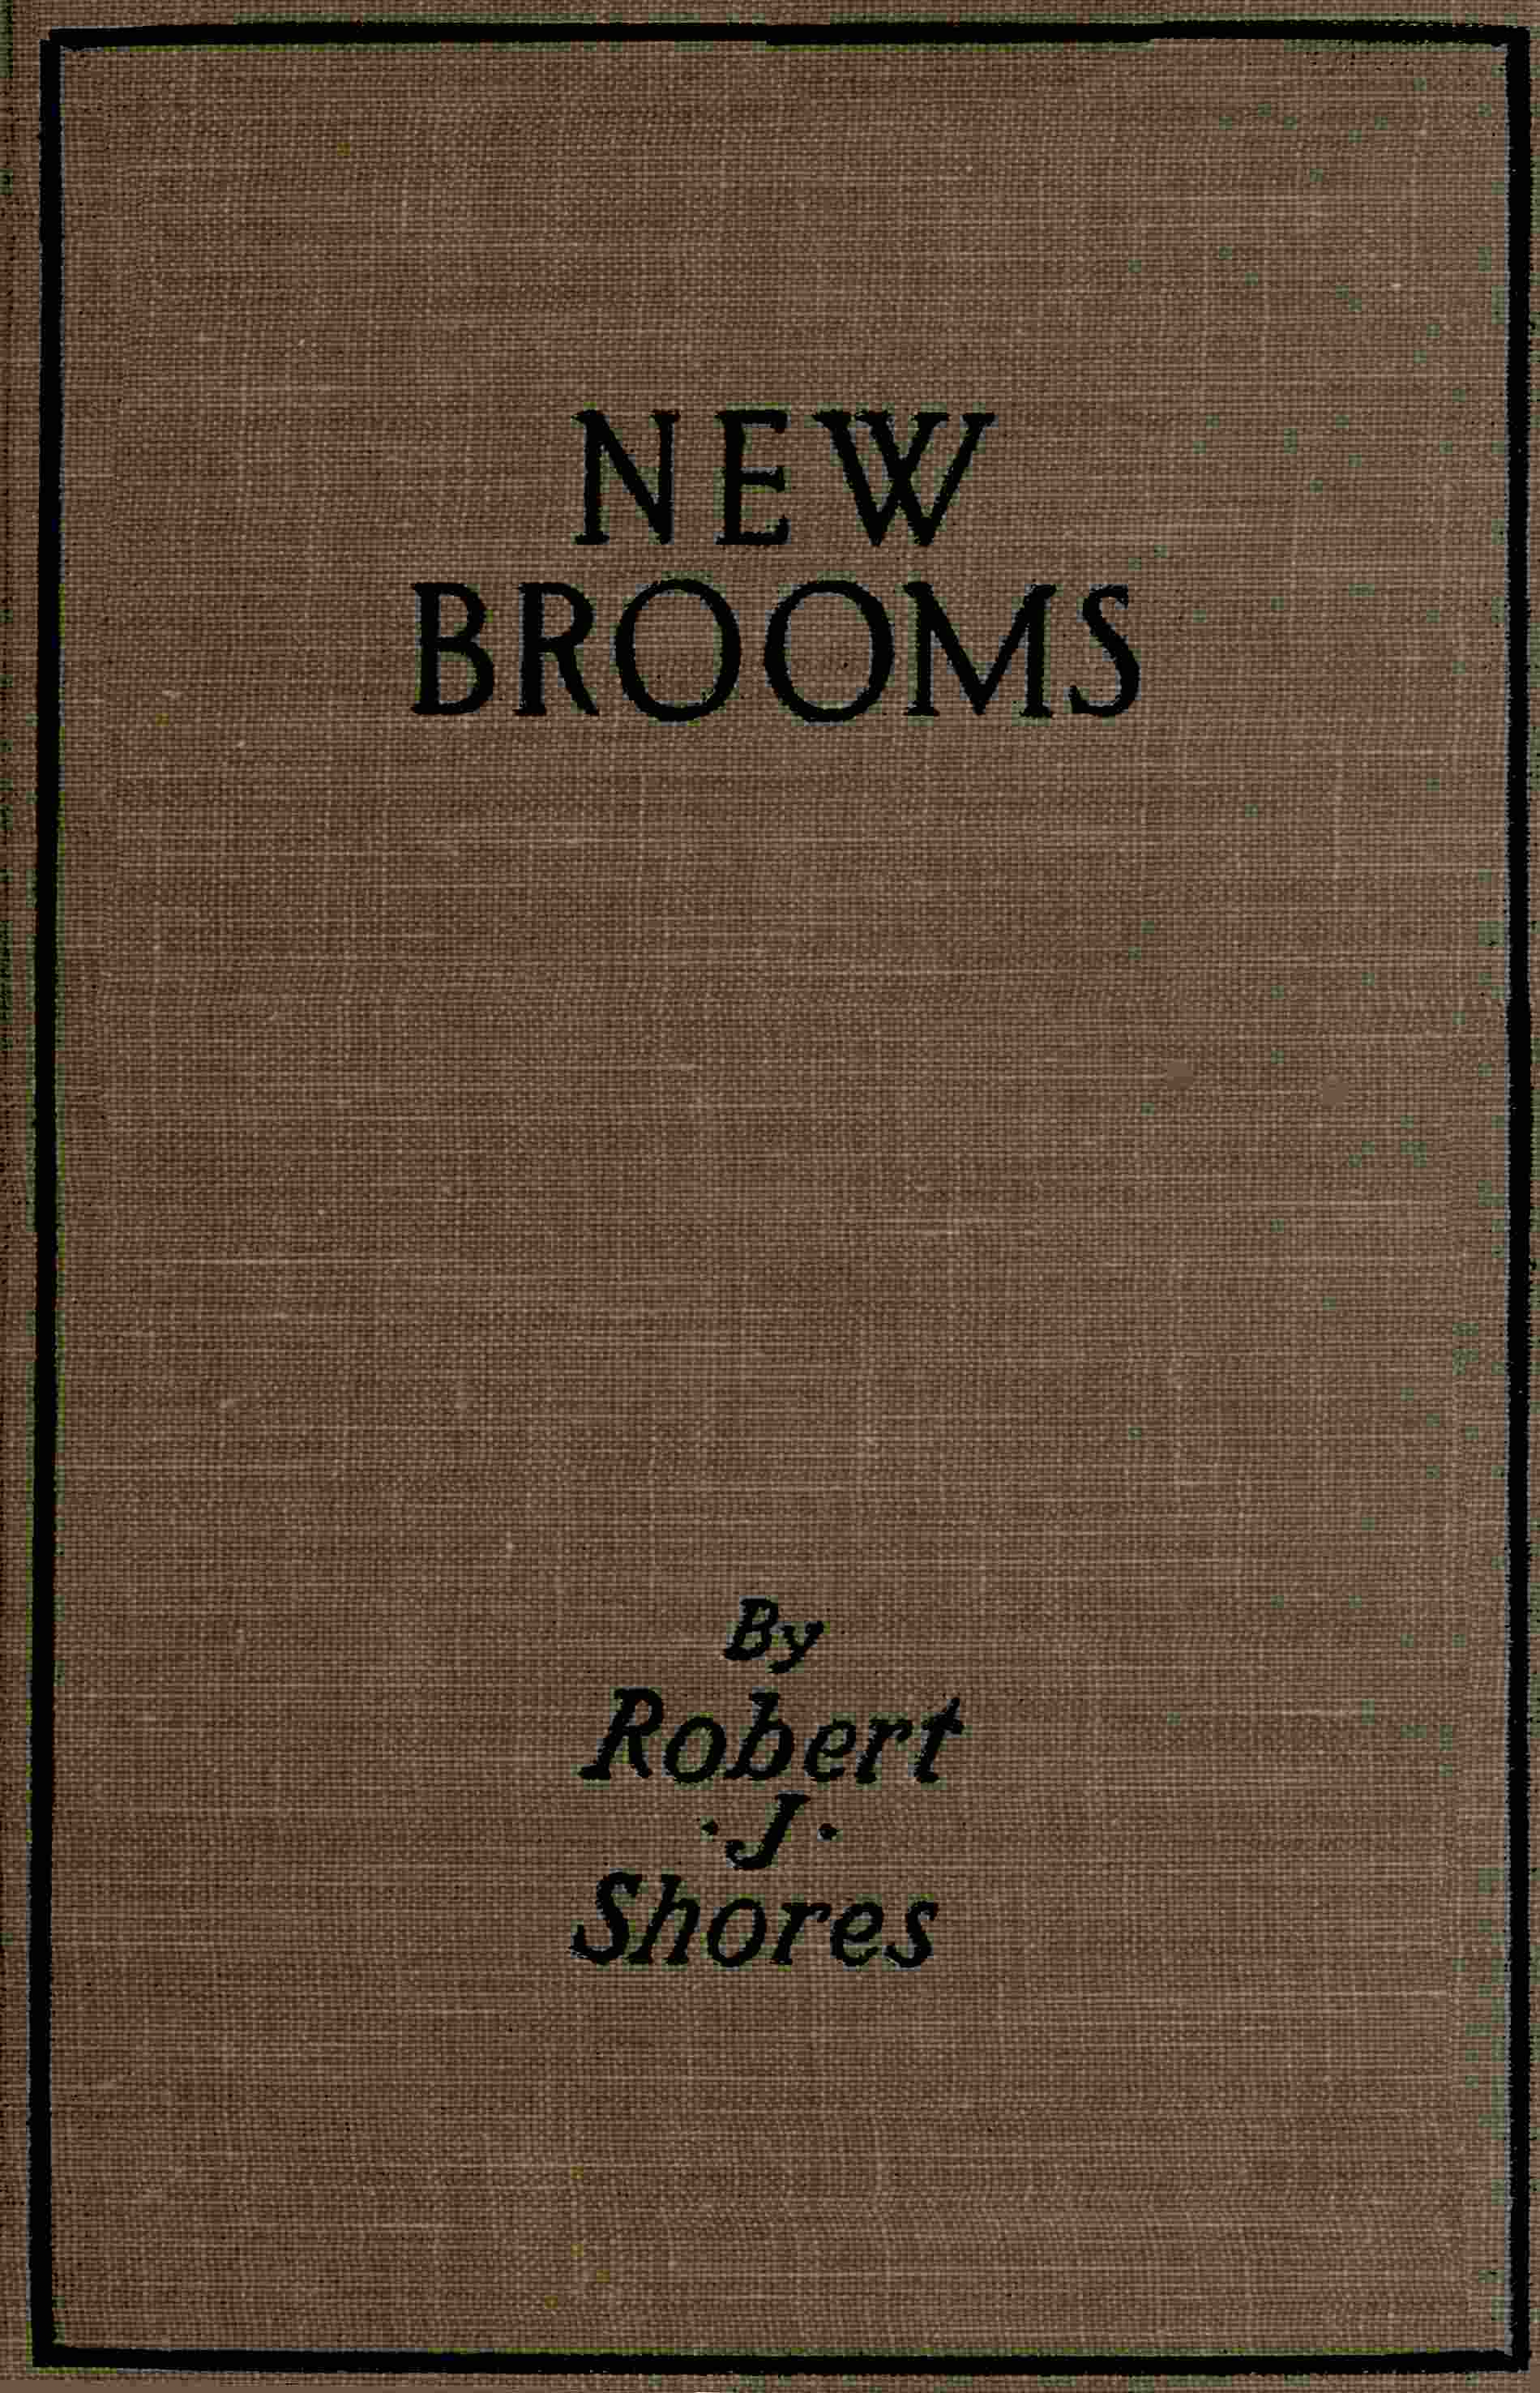 The Project Gutenberg eBook of New Brooms, by Robert J